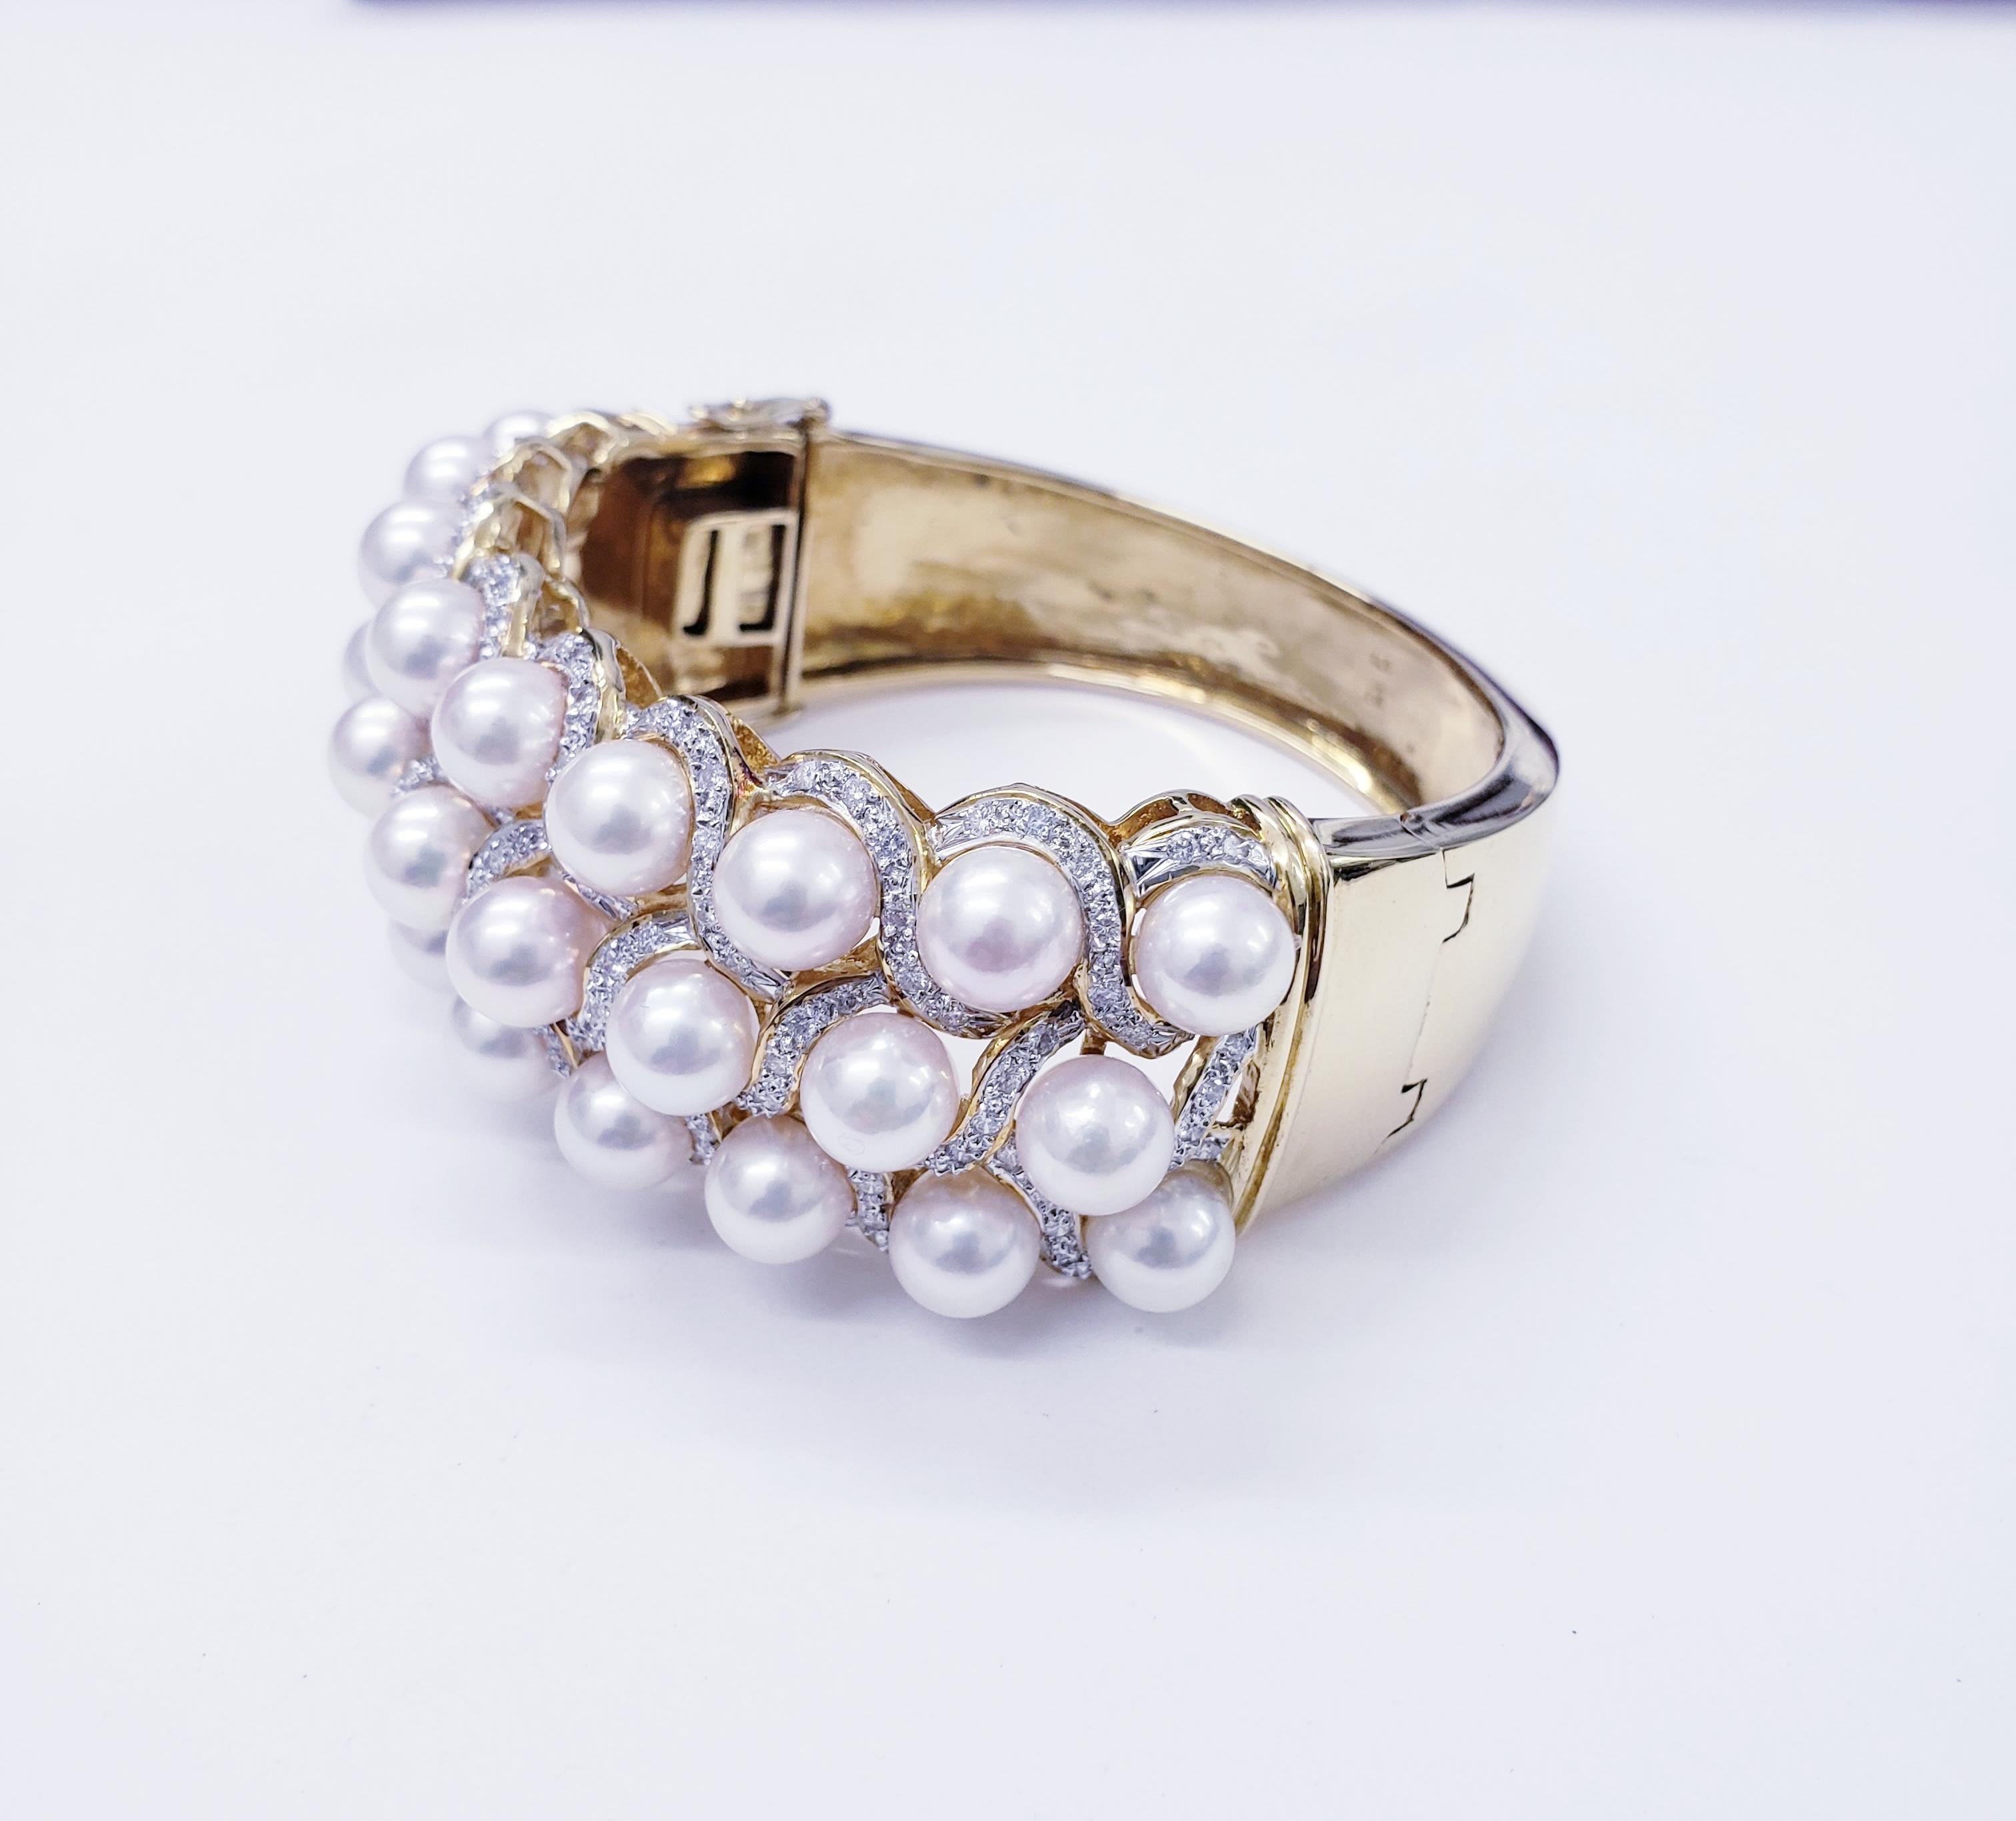 Mid Century Outstanding luxury diamonds and pearls bangle hand crafted in 18k yellow gold. The bangle features 26 Pearls measuring 7mm each. Diamonds VS/SI 4.00TCW 
Circa 1960s
